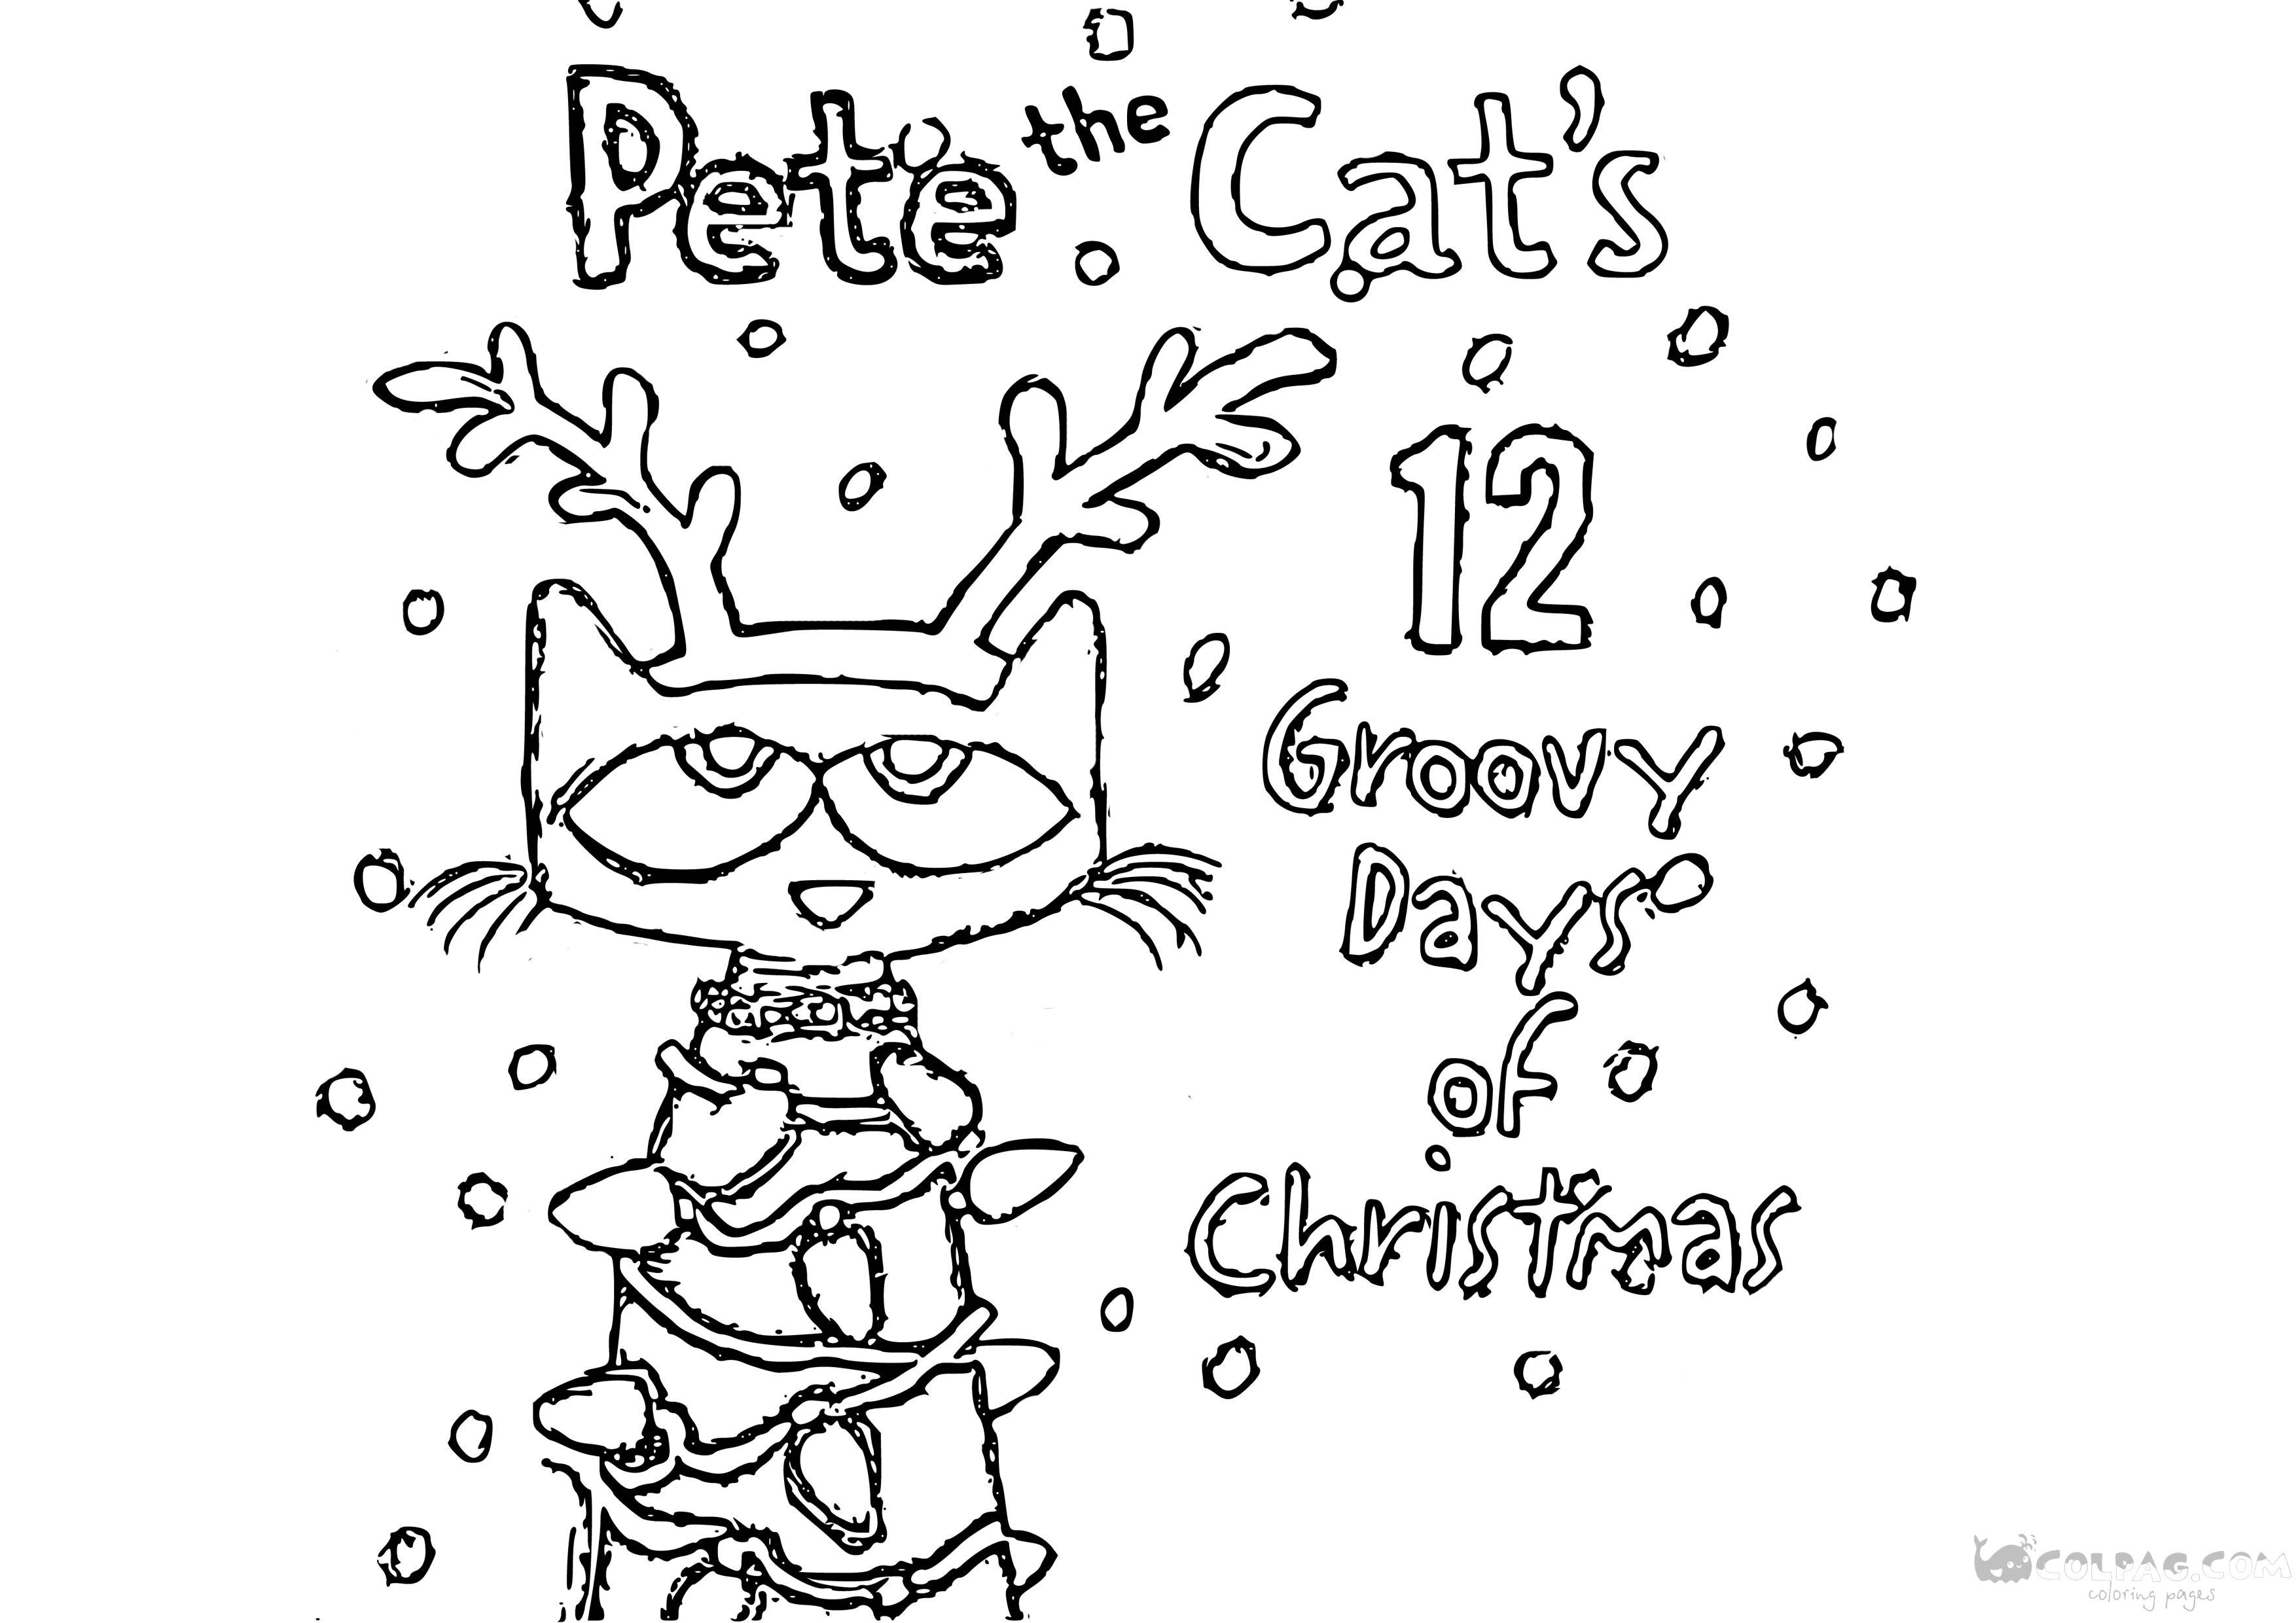 pete-the-cat-coloting-page-44-colpag